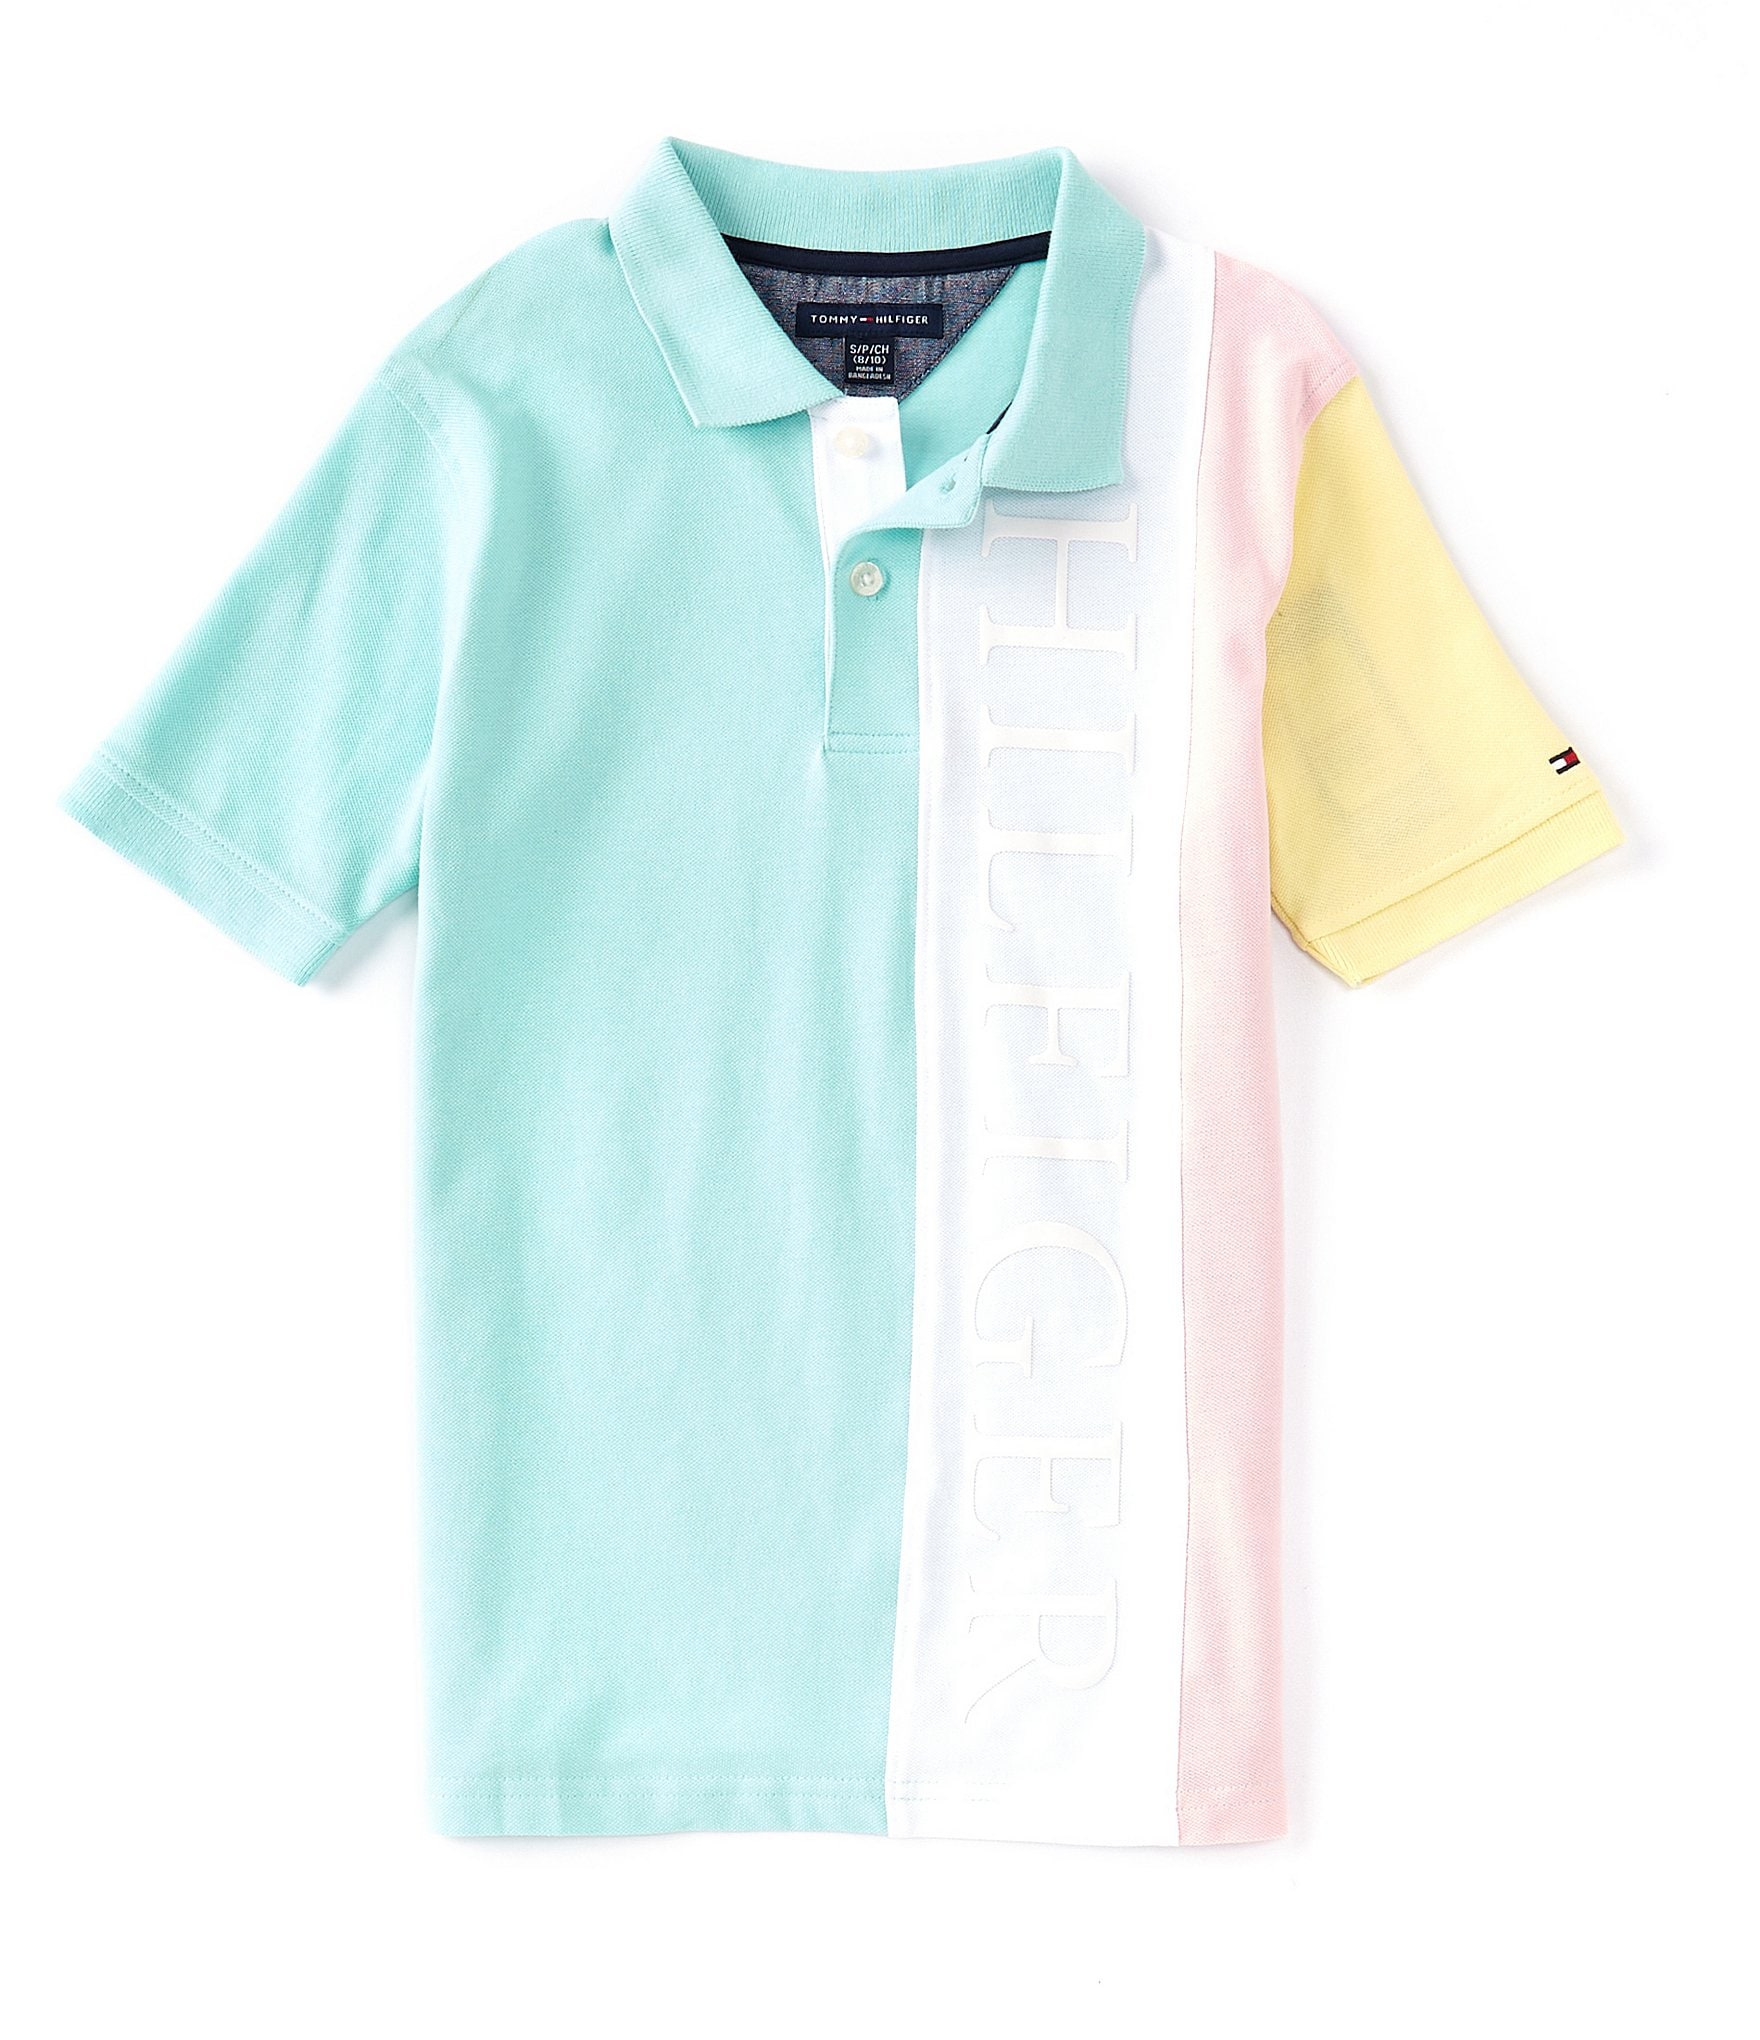 CAMISA POLO TOMMY HILFIGER COLORBLOCK